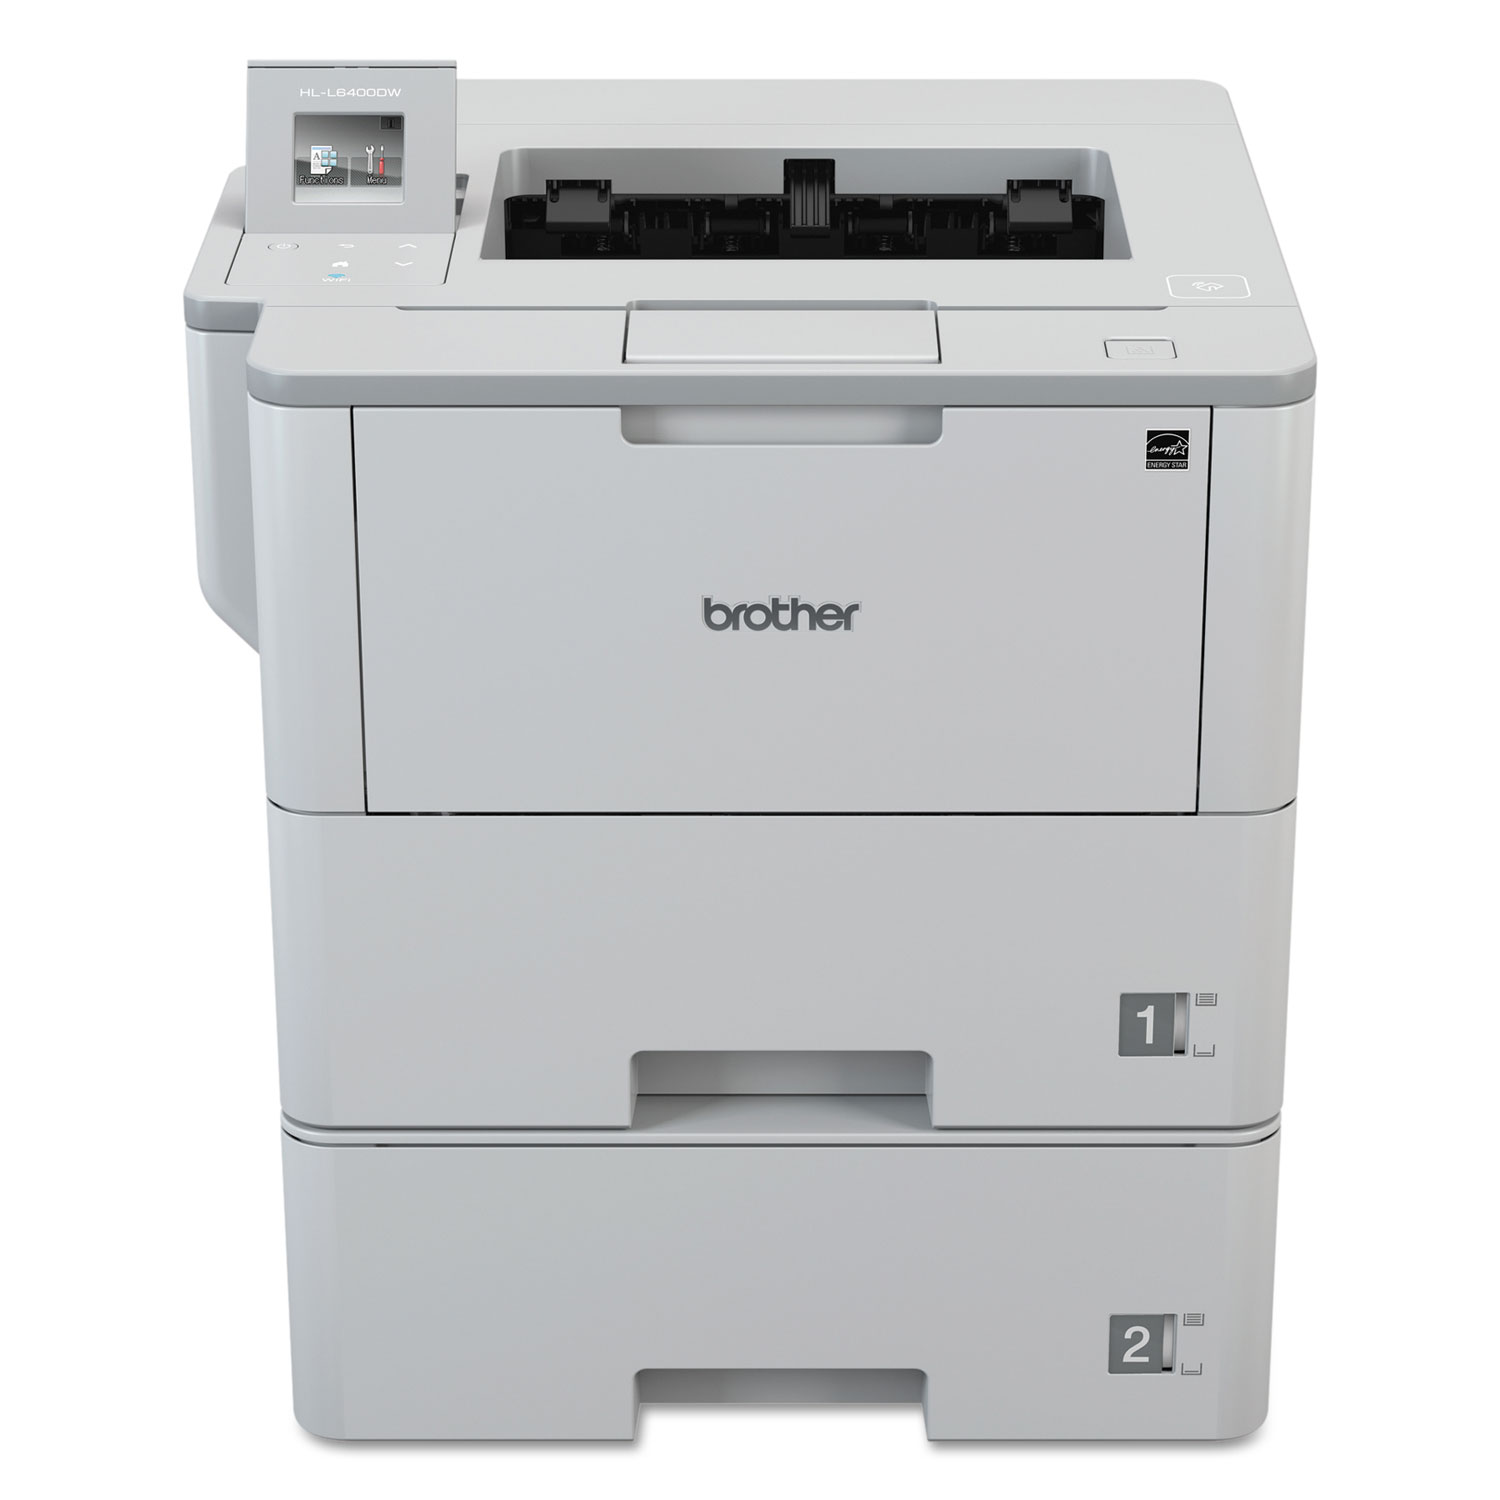  Brother HLL6400DWT HLL6400DWT Business Laser Printer with Dual Trays for Mid-Size Workgroups with Higher Print Volumes (BRTHLL6400DWT) 